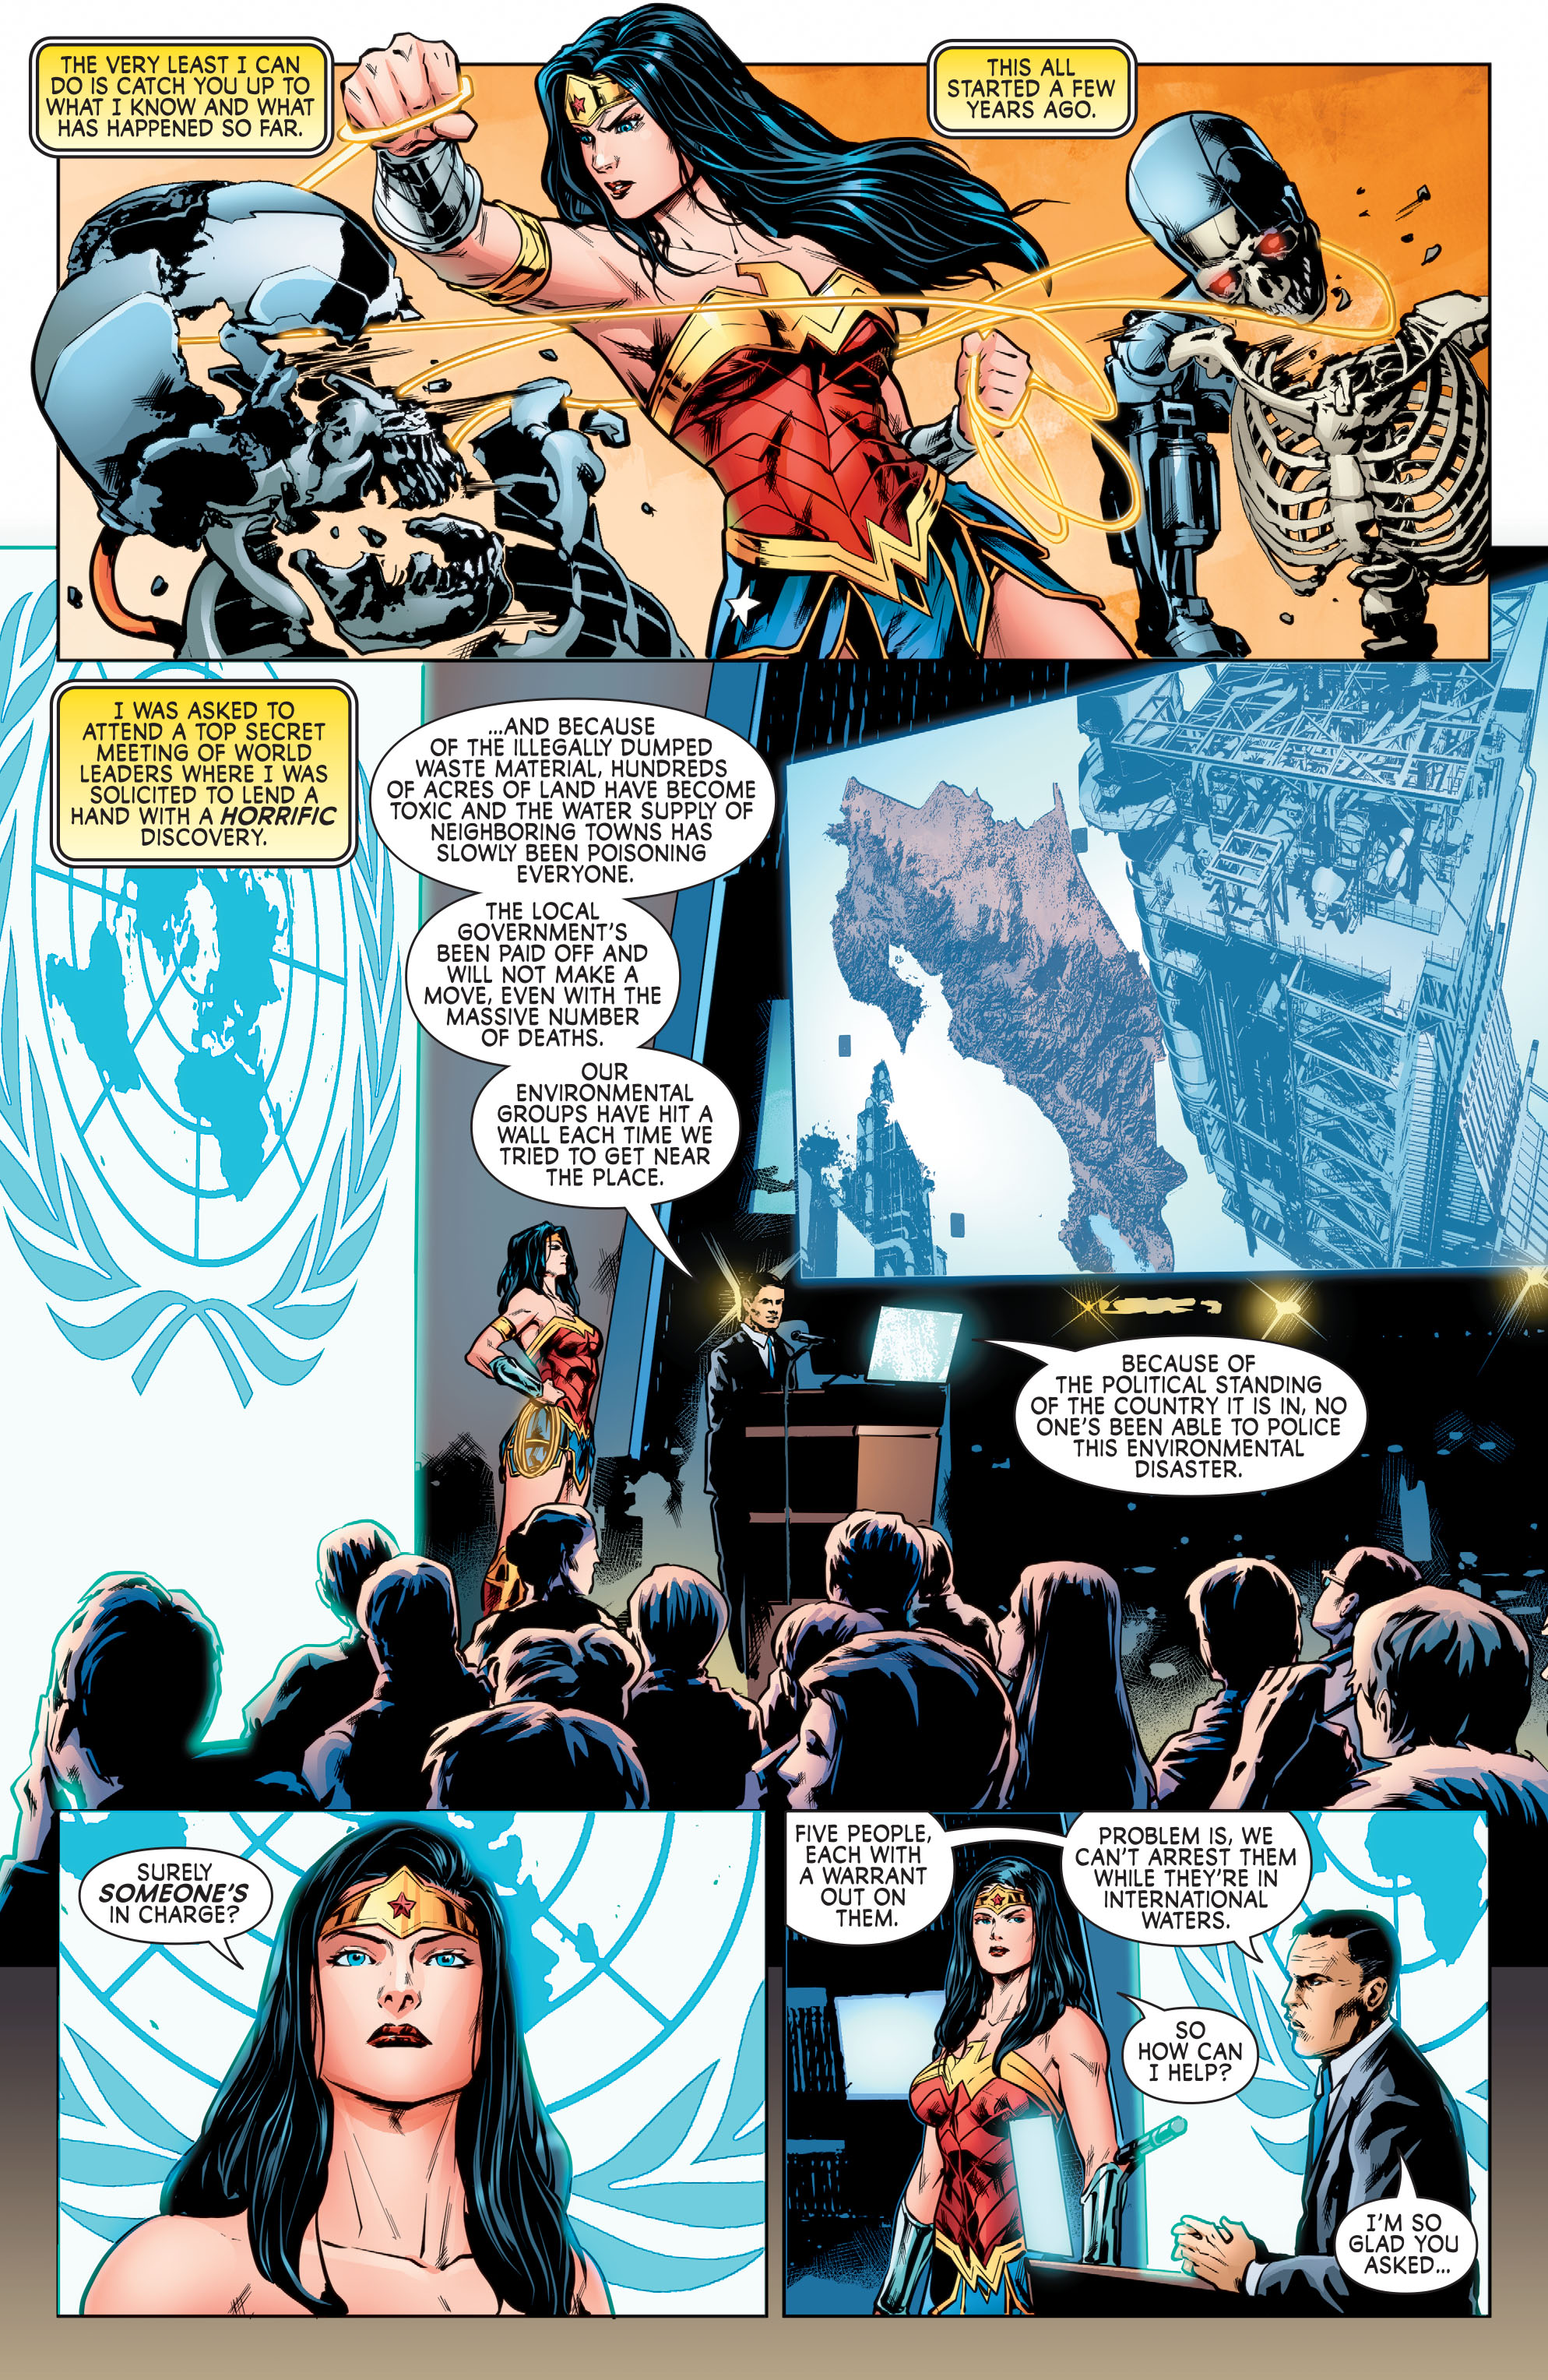 Wonder Woman: Agent of Peace (2020): Chapter 9 - Page 3